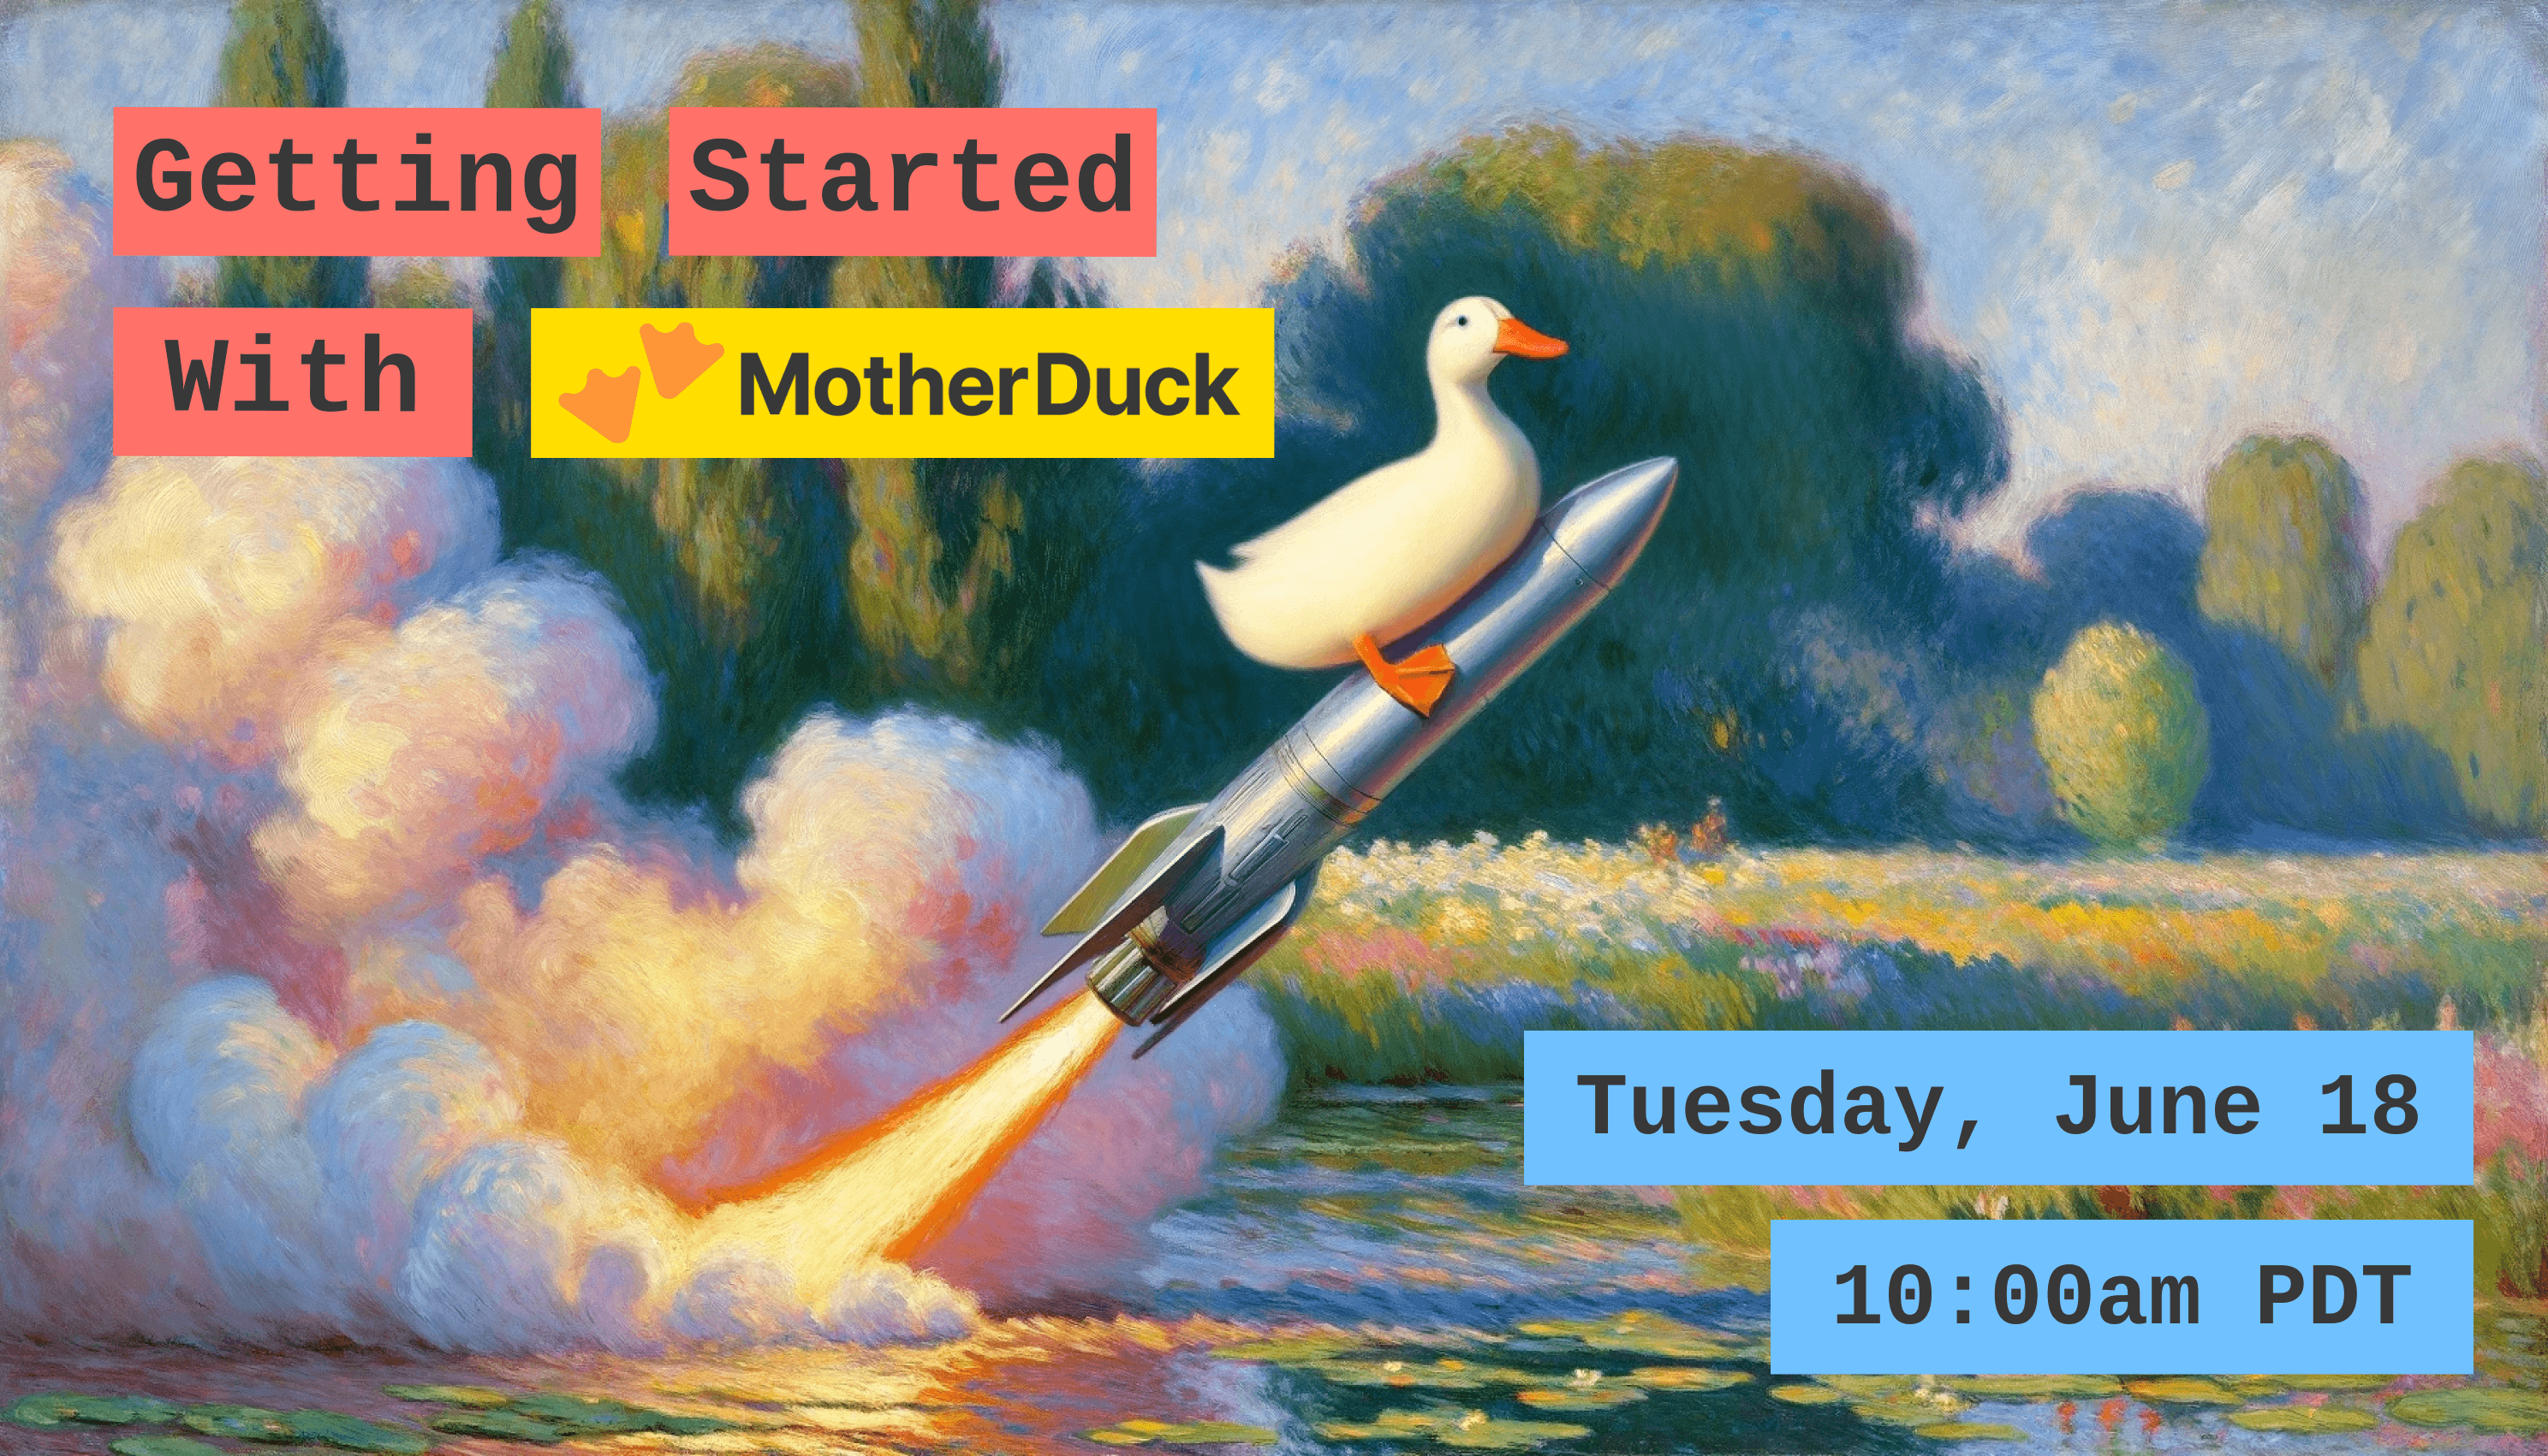 Getting Started with MotherDuck